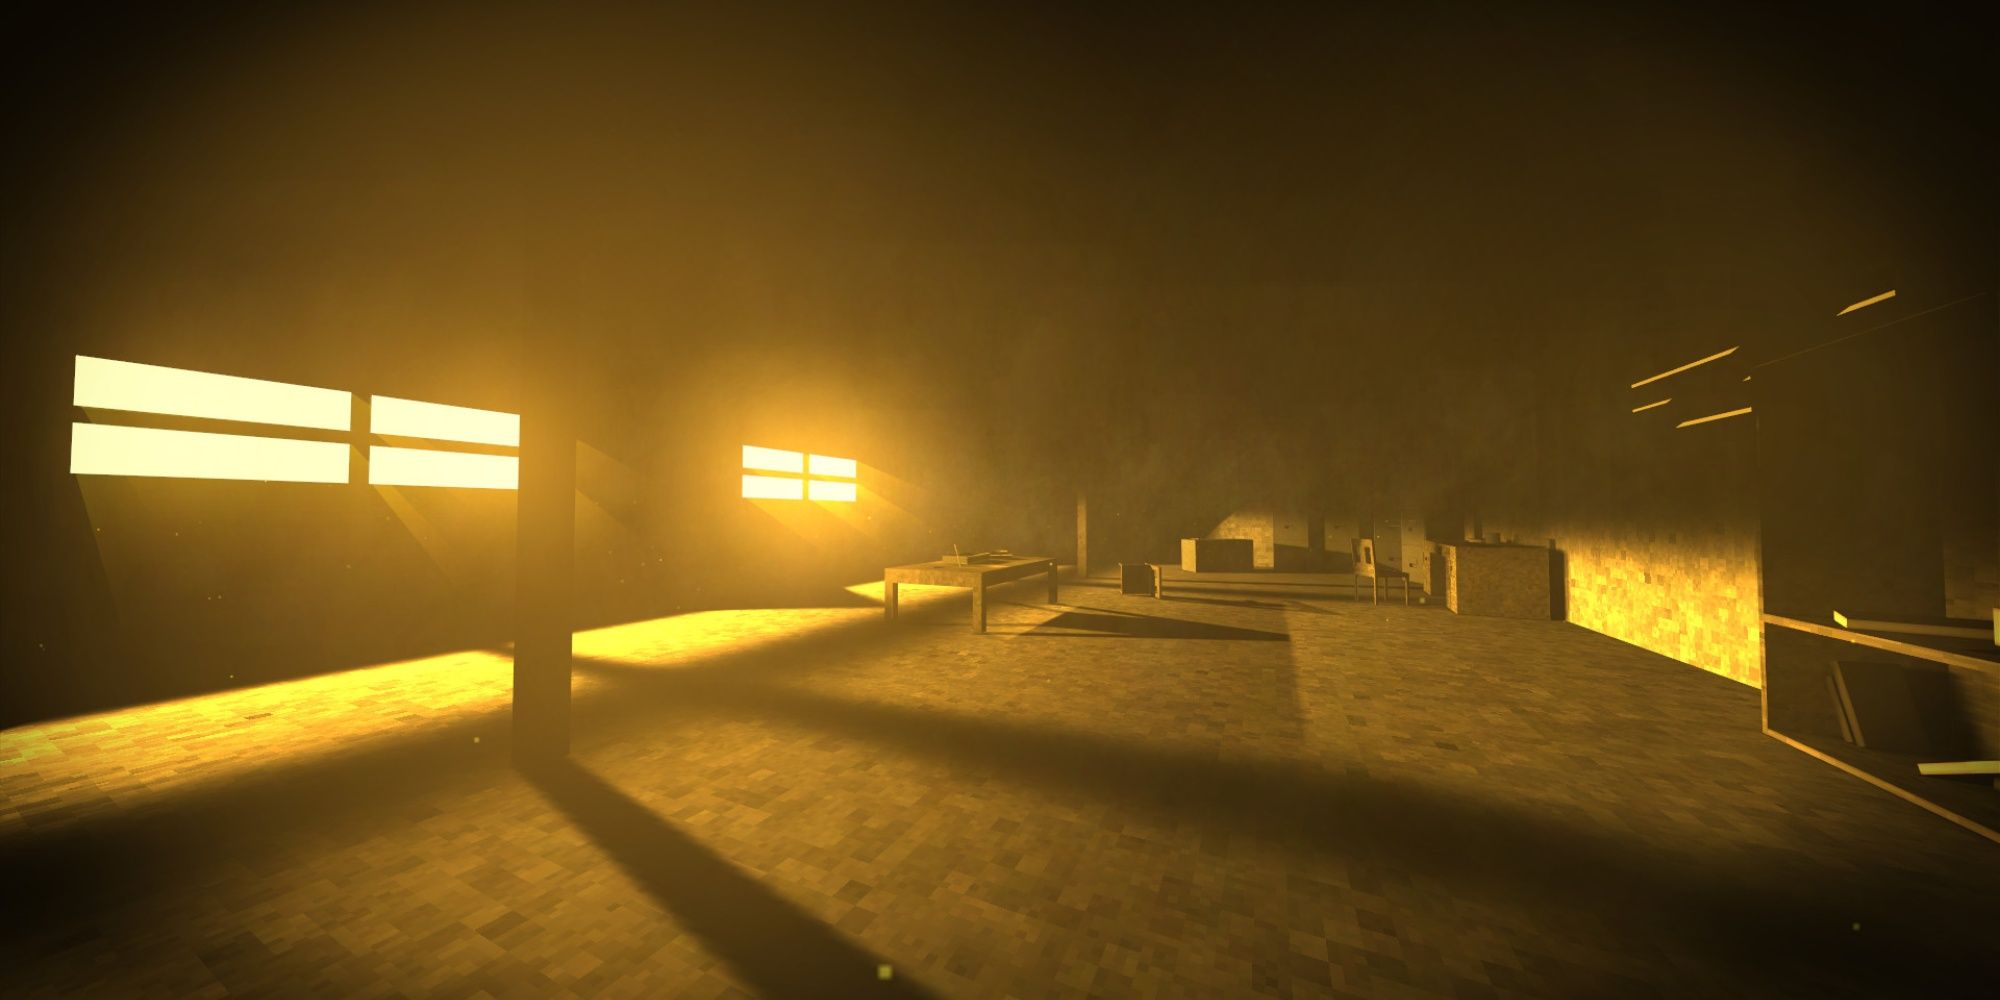 Screenshot from Fingerbones showing a dimly lit room in an abandoned building.